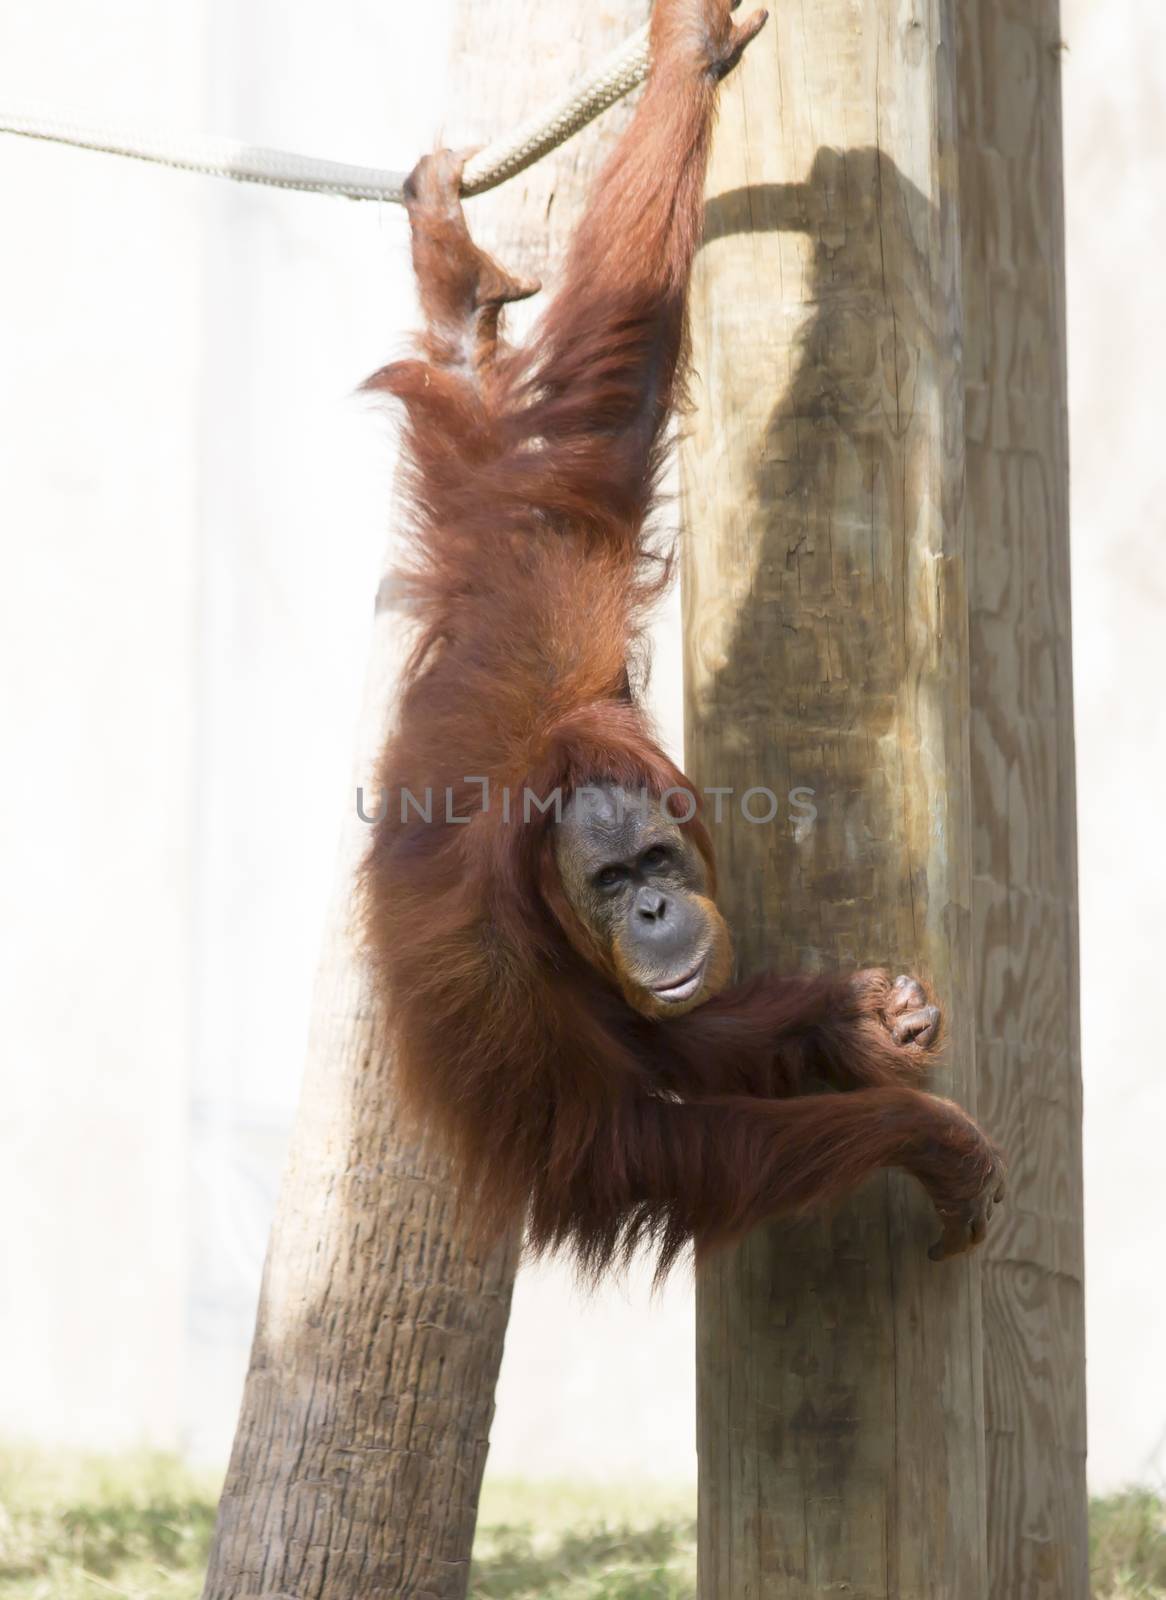 Orangutan hanging from a rope